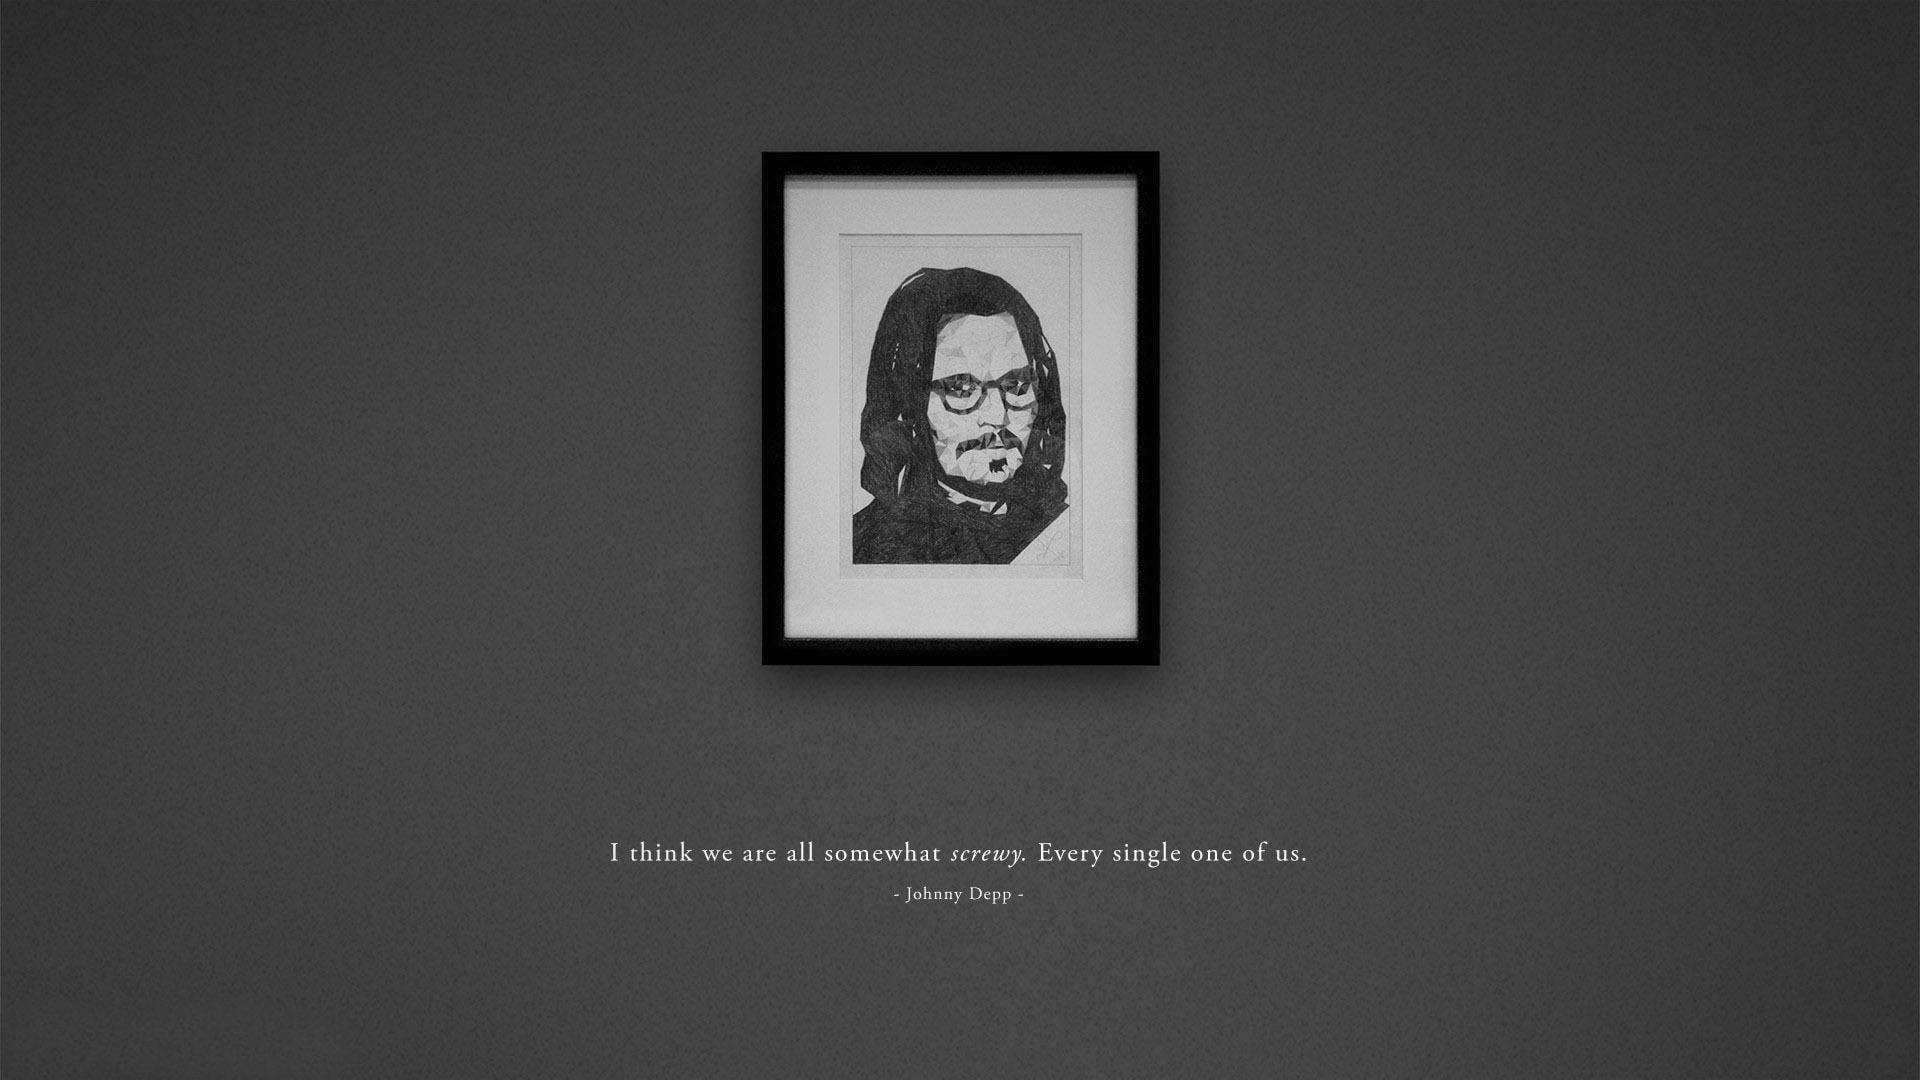 Johnny Depp quote, black wooden framed portrait of man, quotes